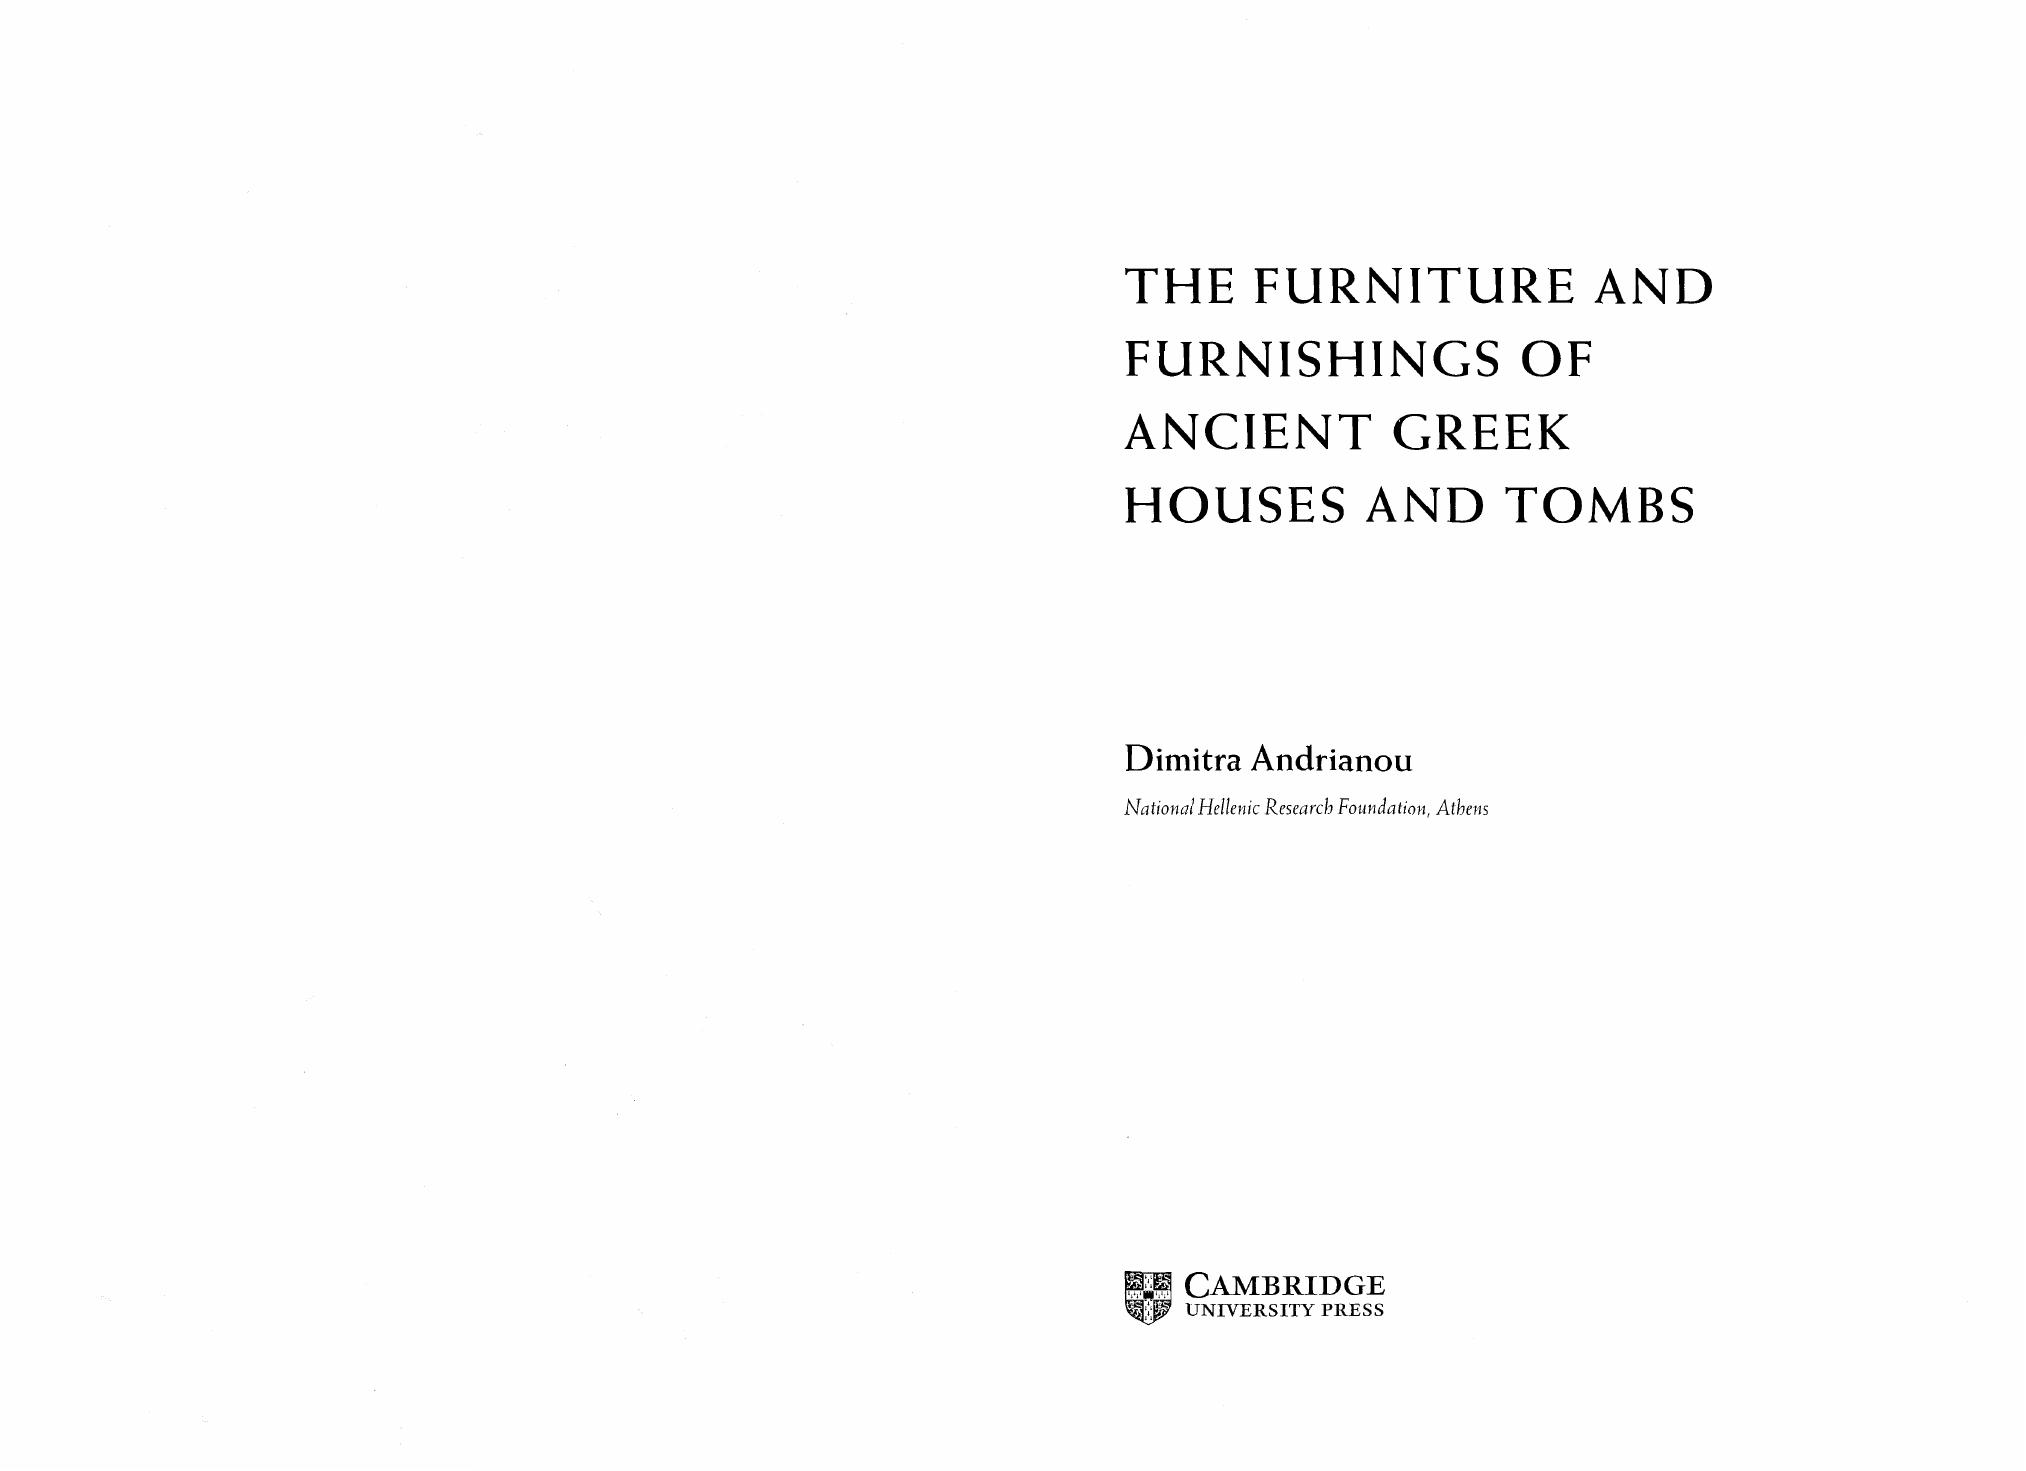 The Furniture and Furnishings of Ancient Greek Houses and Tombs by Dimitra Andrianou